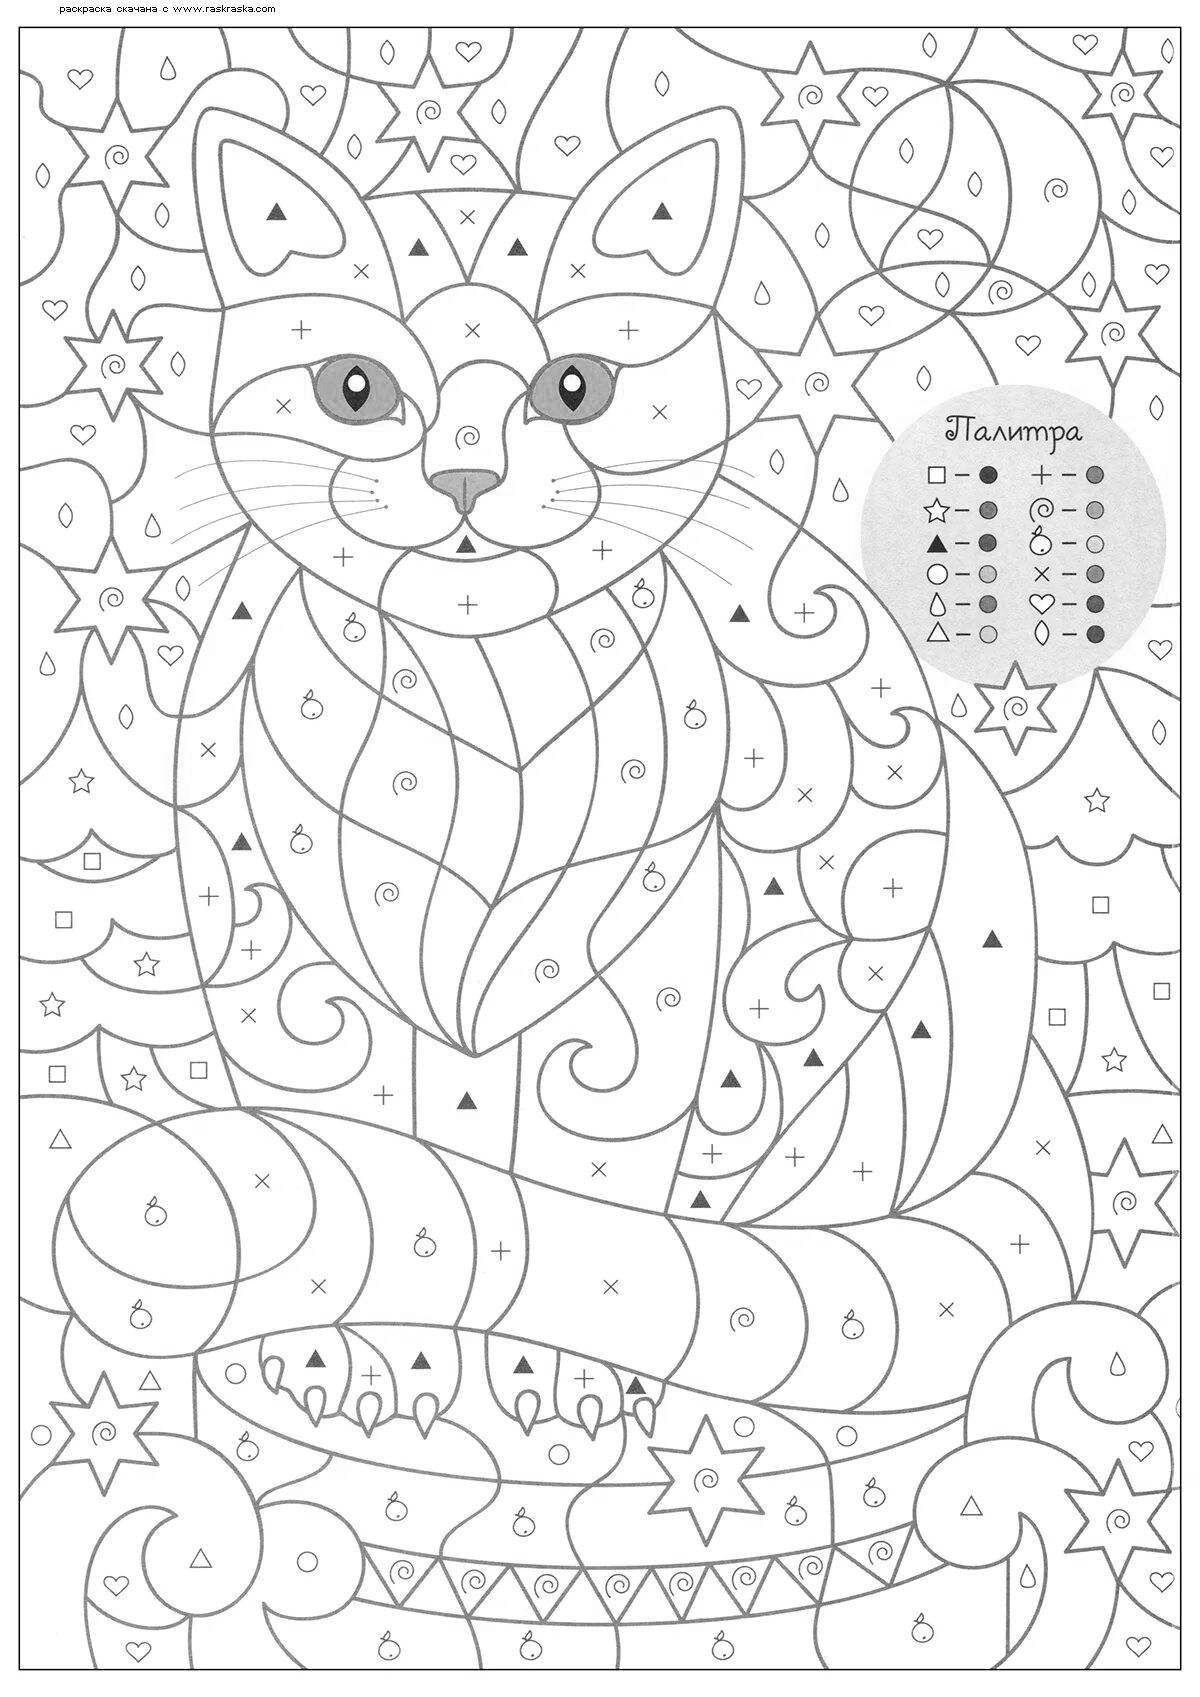 Exquisite cat coloring by numbers